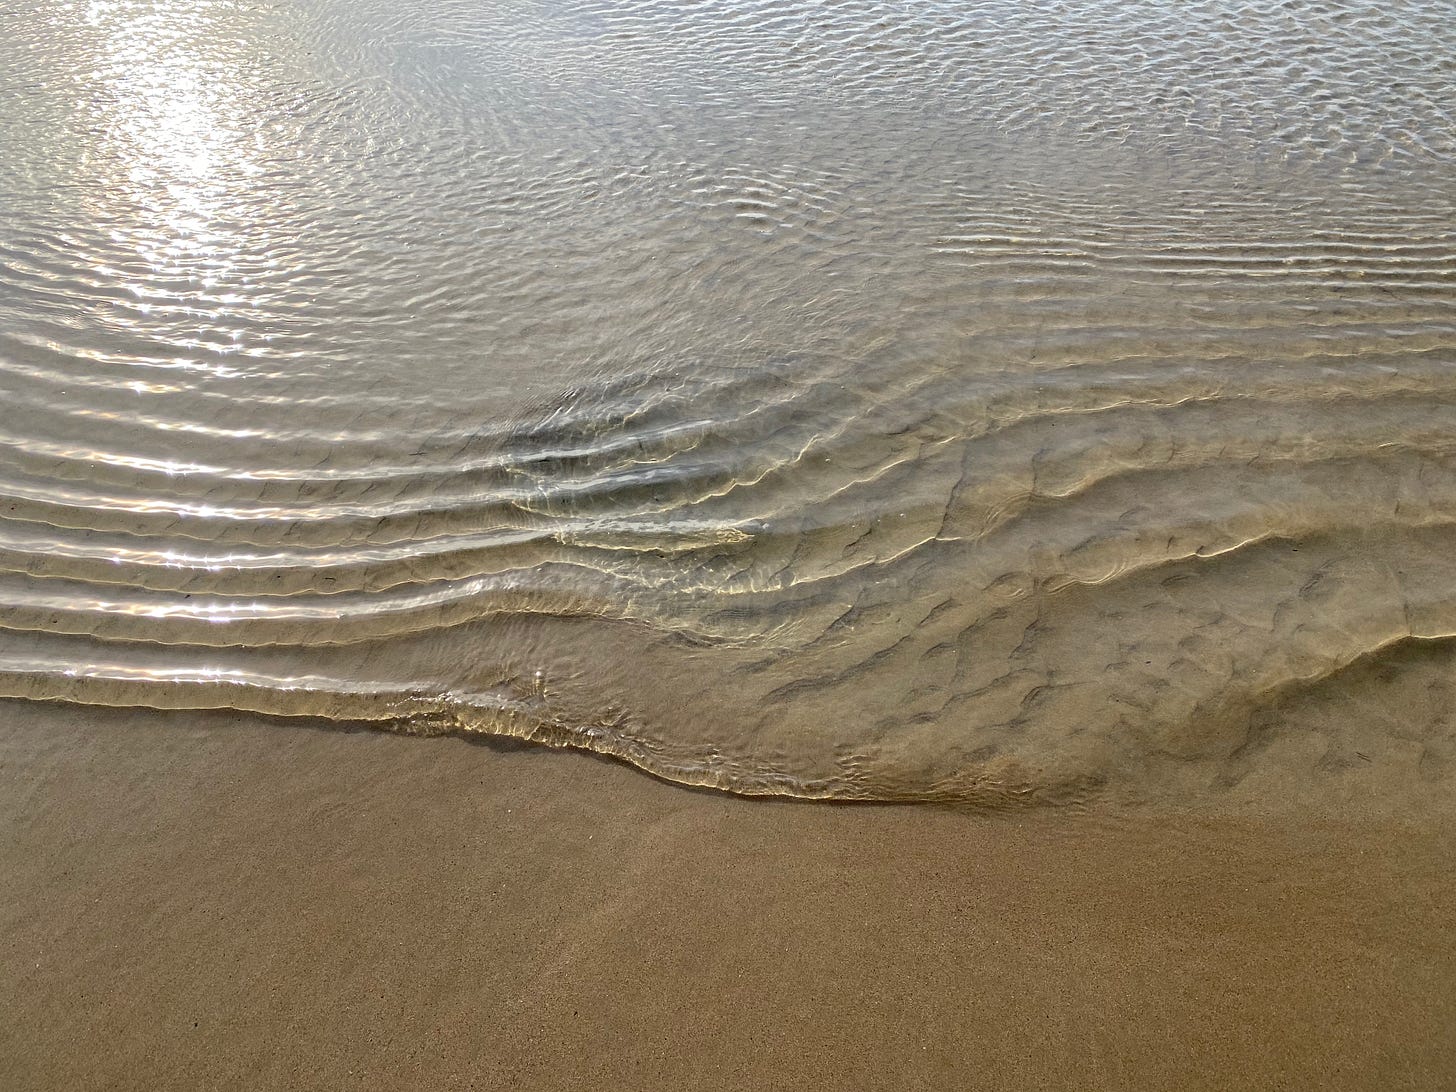 Sunlit shallow water on a sandy beach, ripples and a deeper hole under the water.